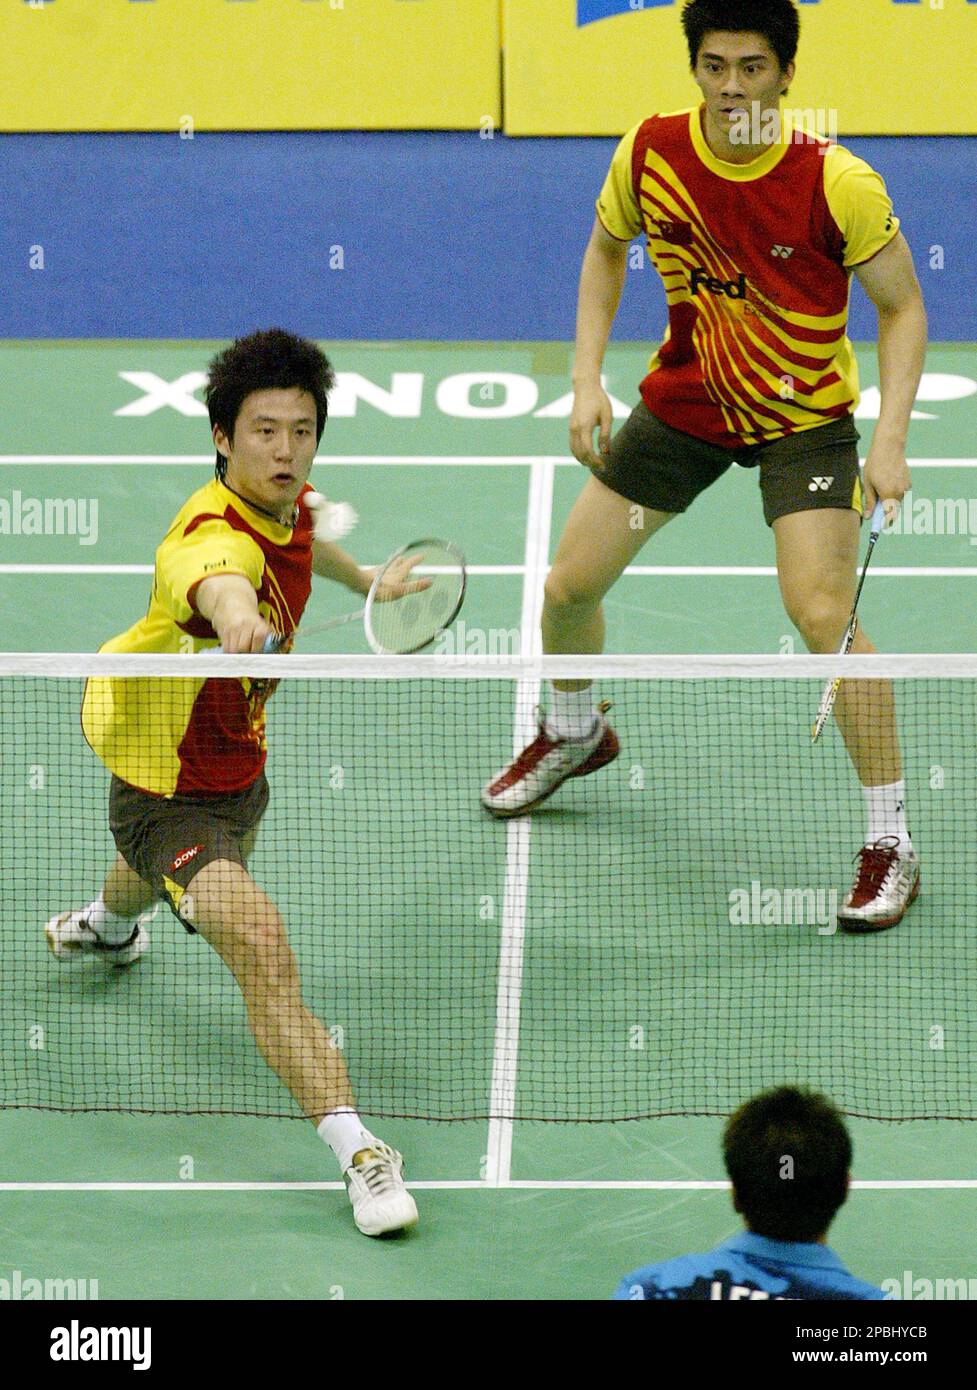 Chinas Yun Cai, left, return a shot as his partner Fu Haifeng looks on during their mens doubles finals of the Aviva Badminton Open Singapore Super-Series Sunday, May 6, 2007 in Singapore.